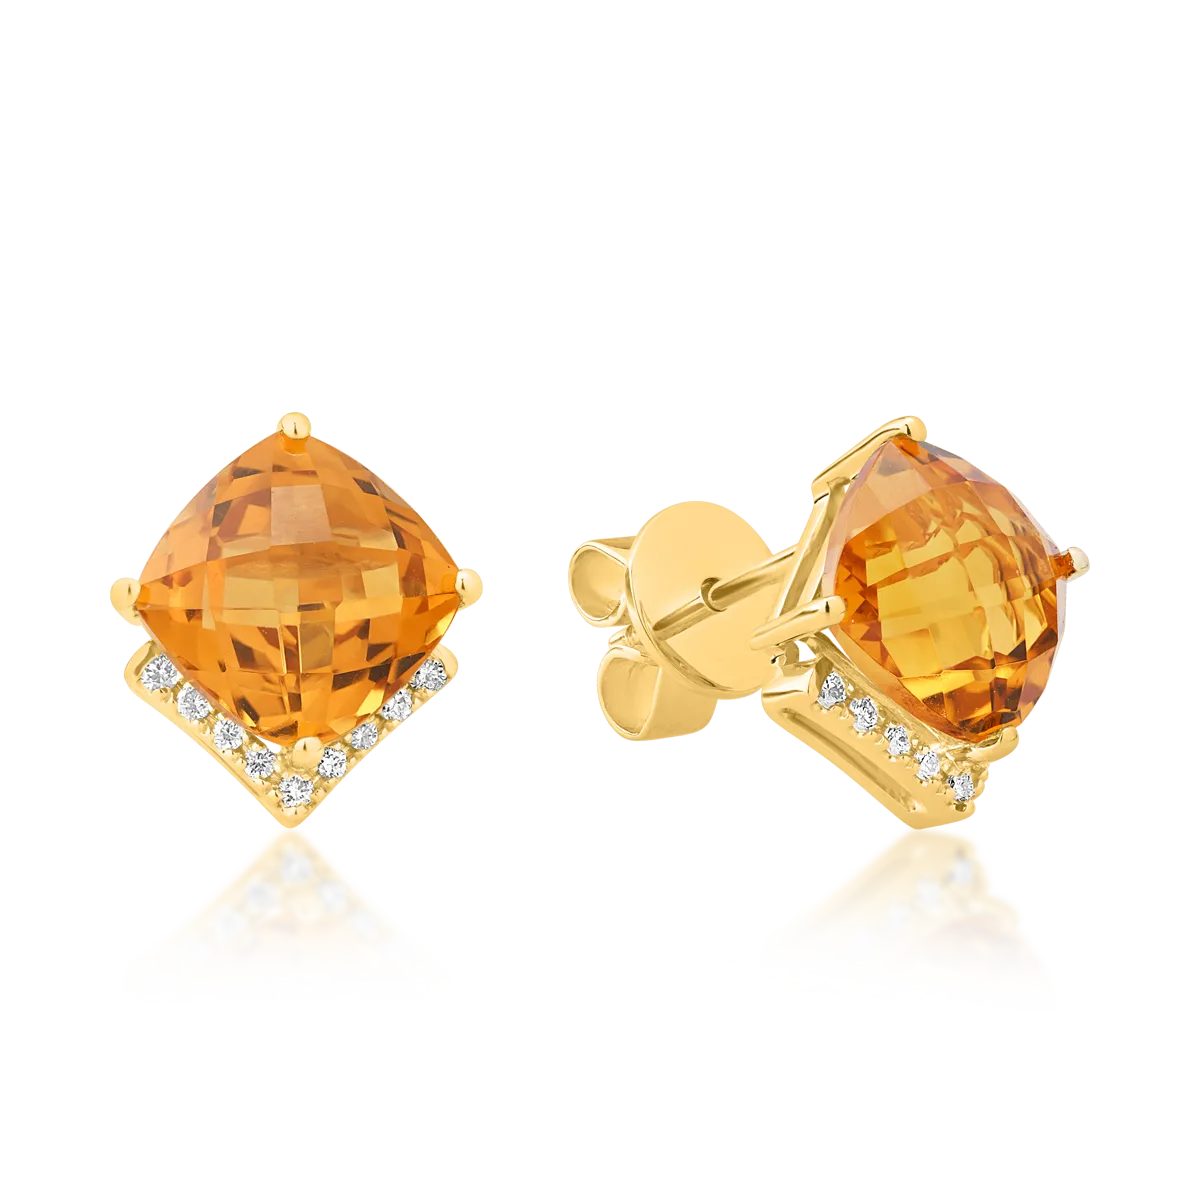 18K yellow gold earrings cu citrine de 4.3ct and diamonds of 0.1ct